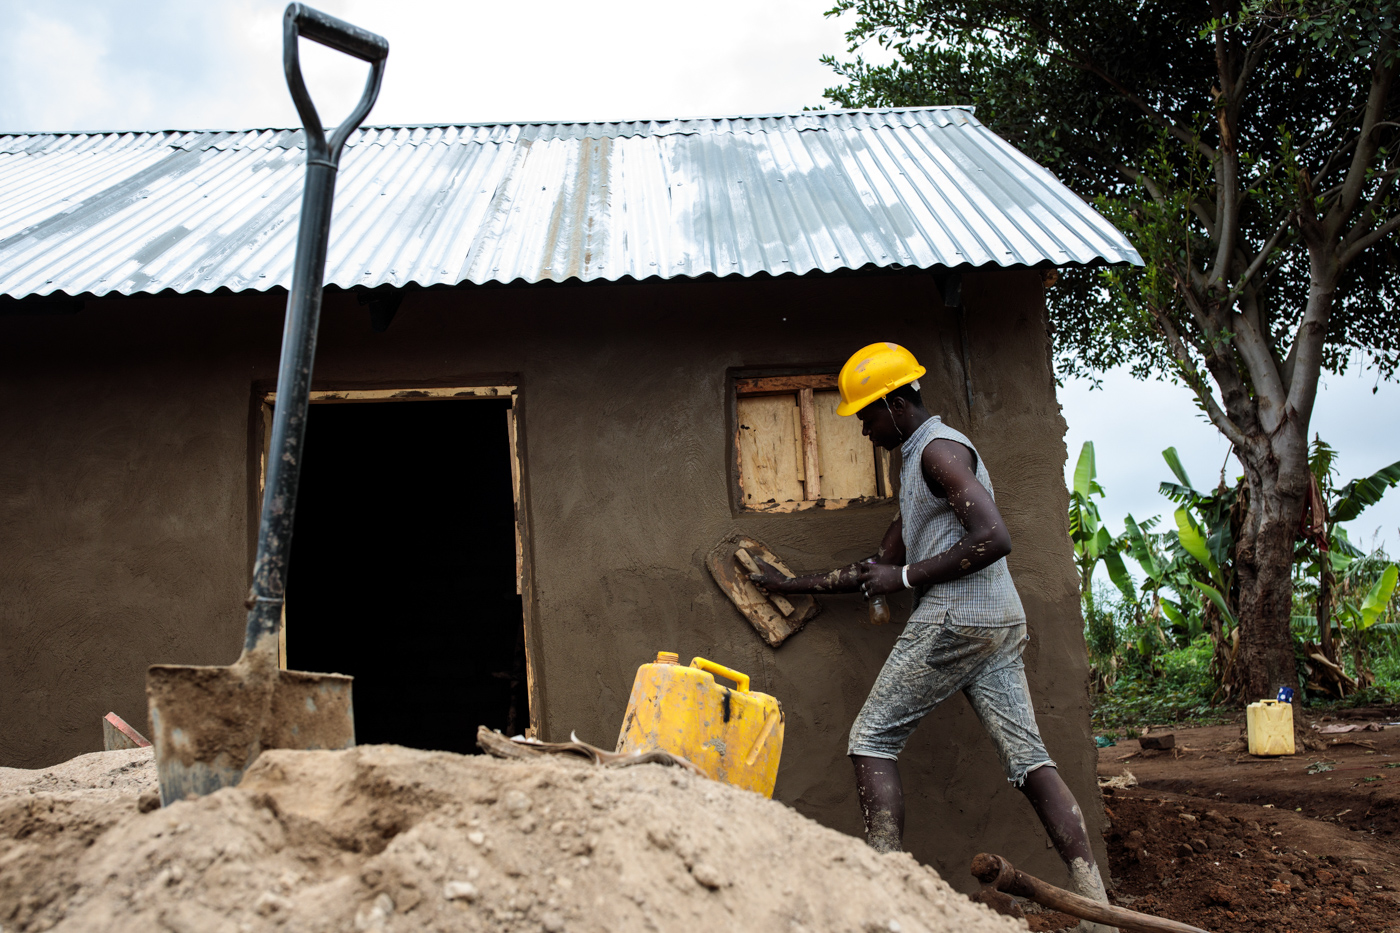  KYANGWALI, UGANDA: A young refugee from the Democratic Republic of Congo builds a shelter in the Kyangwali Refugee Settlement on April 3, 2018. 